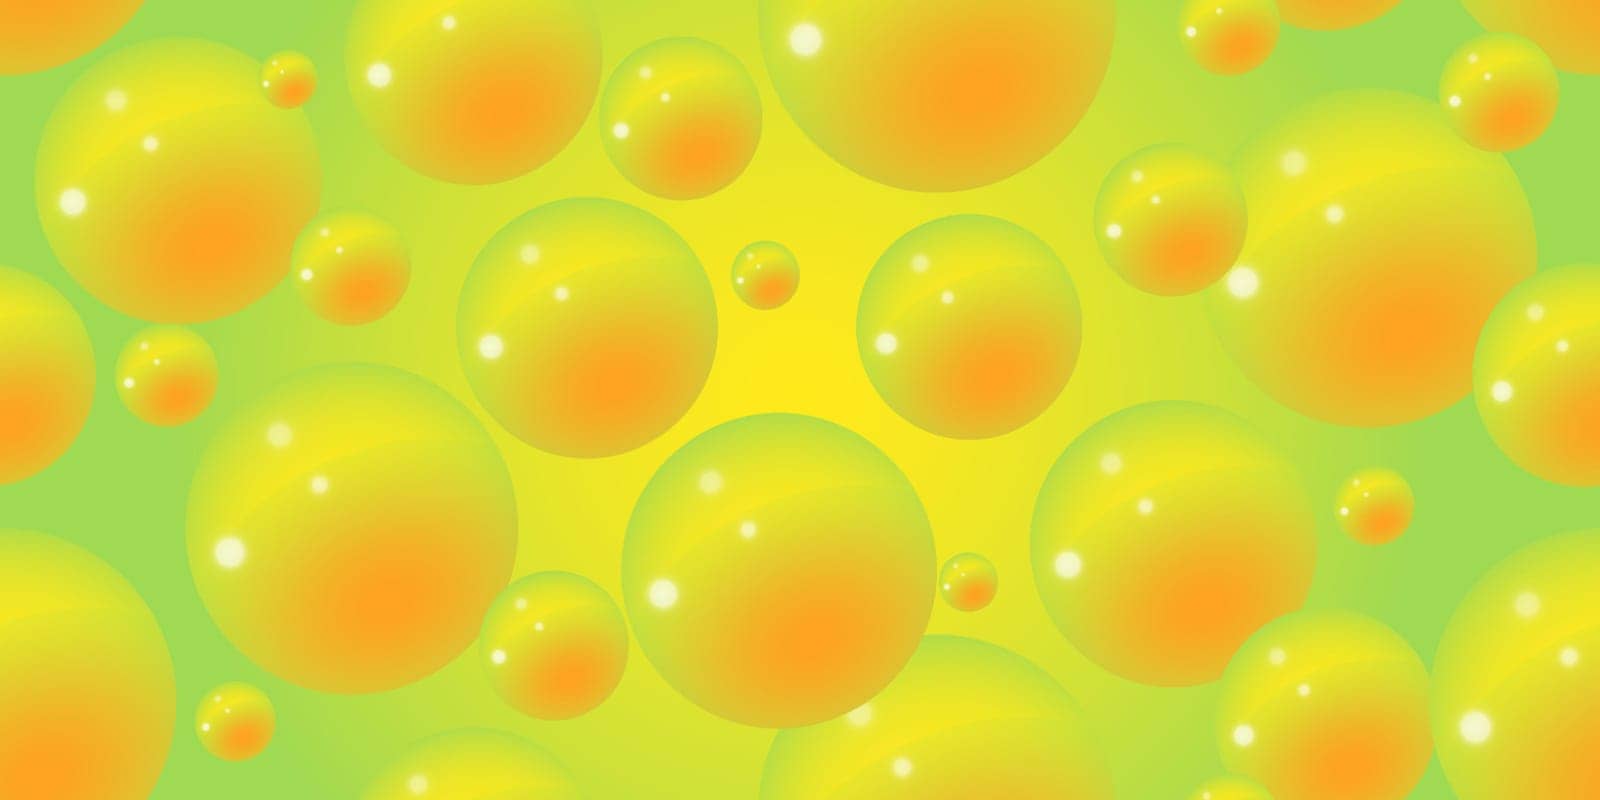 Summer sunny warm background with bubbles on it. Abstract bubble background. 3d texture of liquid with blobs. Seamless pattern. Yellow, orange, light green color. Vector illustration.